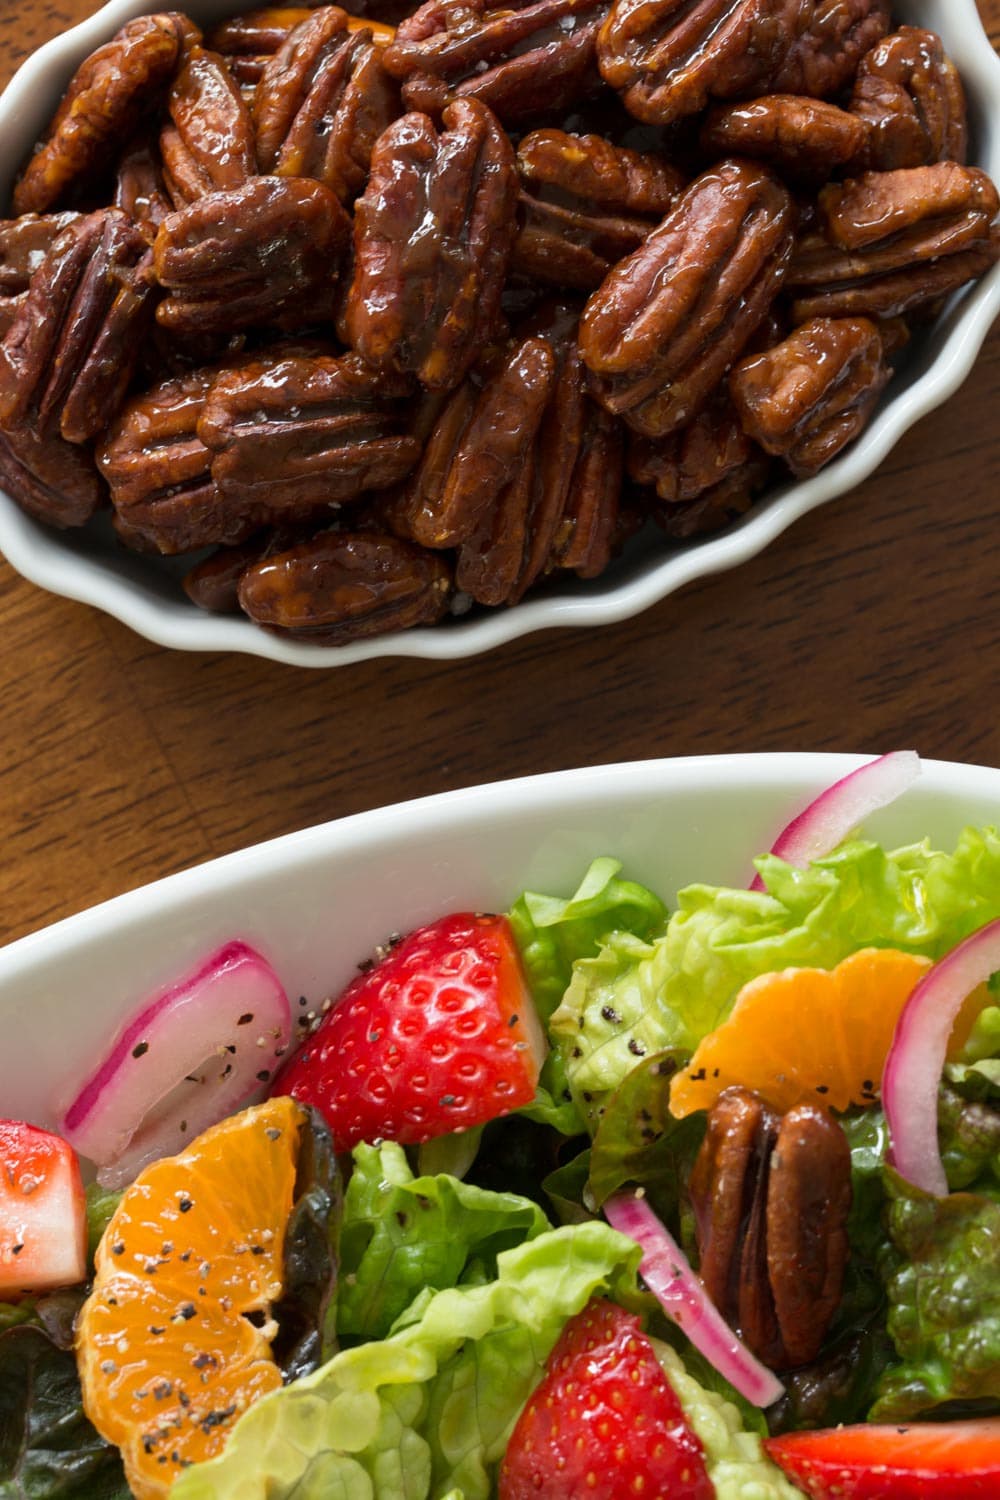 Strawberry Clementine Salad with Red Wine Vinegar Dressing - With an easy, sweet, tangy dressing and a topping of caramelized pecans, this delicious, fresh salad will add a splash of pizzazz to any meal. thecafesucrefarine.com